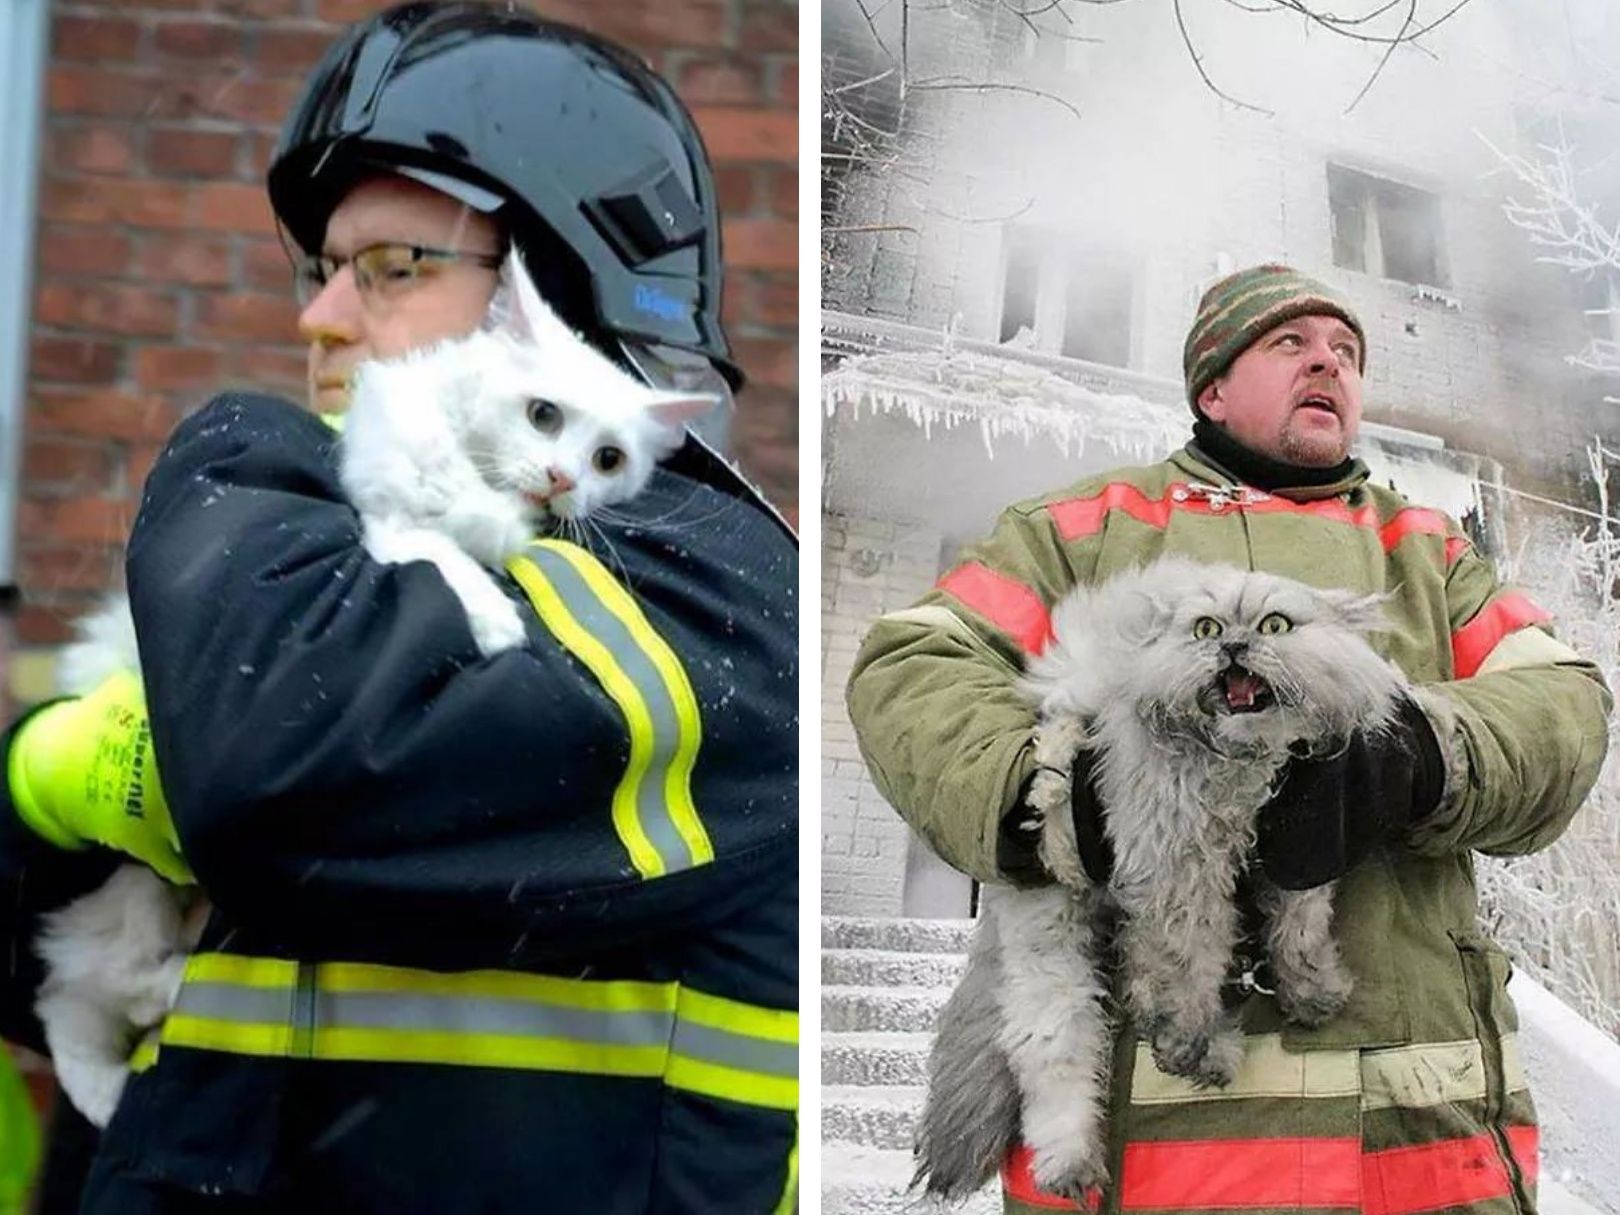 Cat from Denmark vs cat from Russia after being saved from a fire